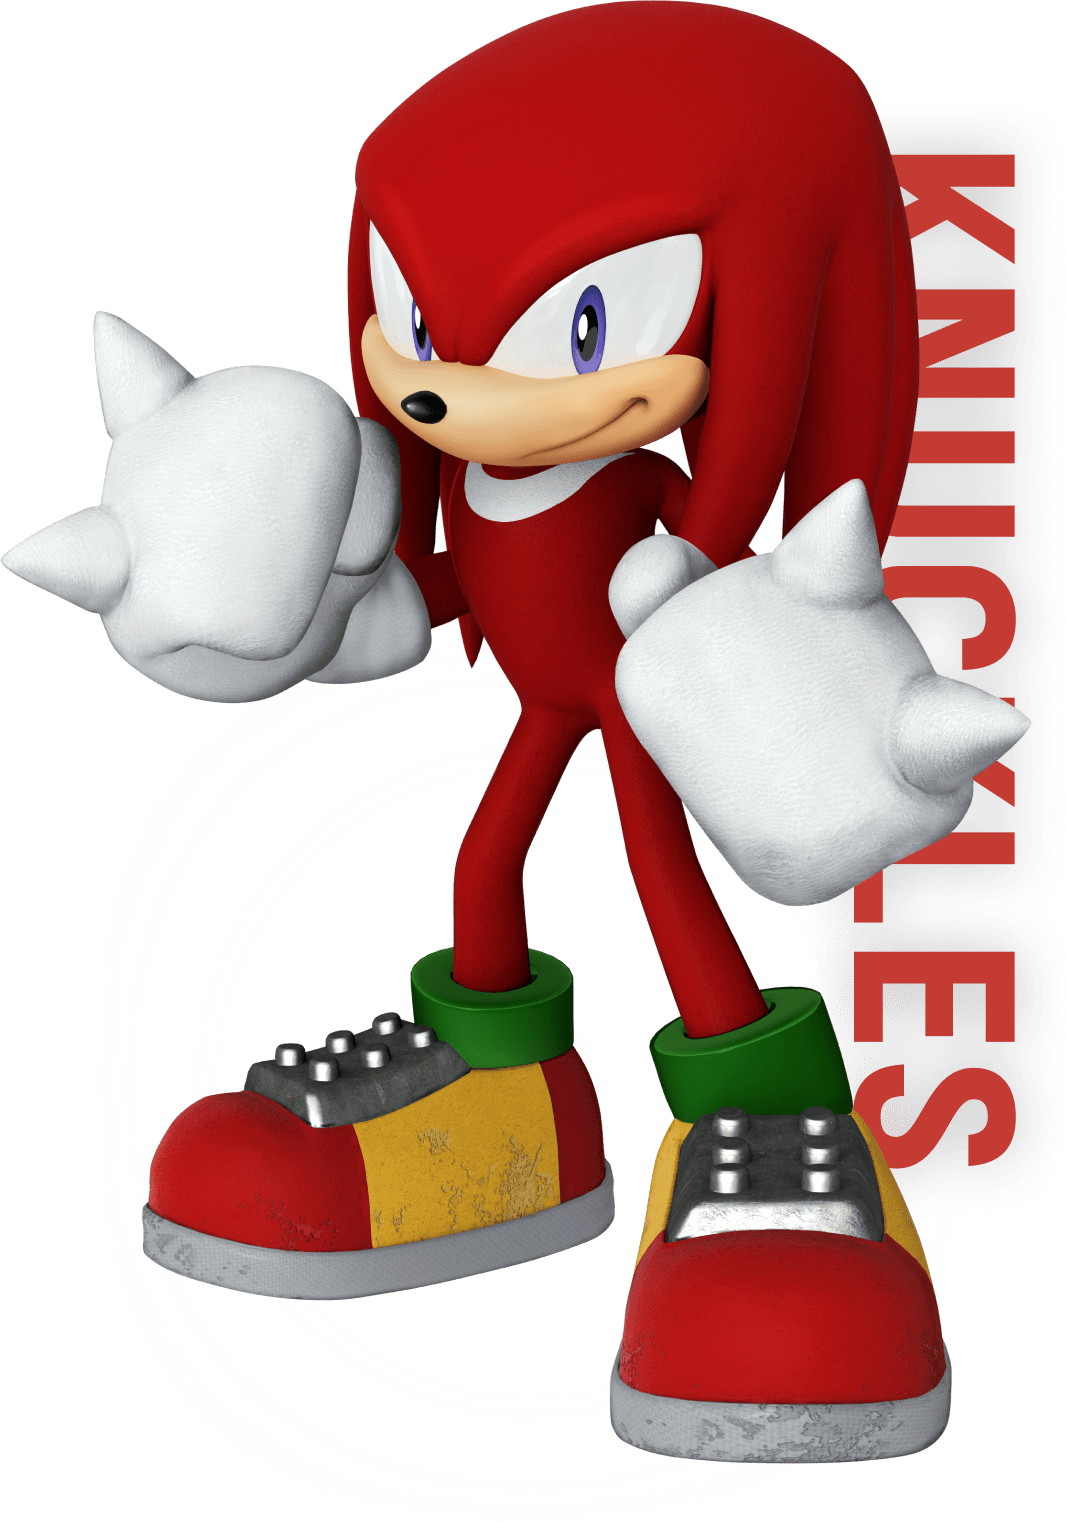 Main character photo image
																		knuckles@2x